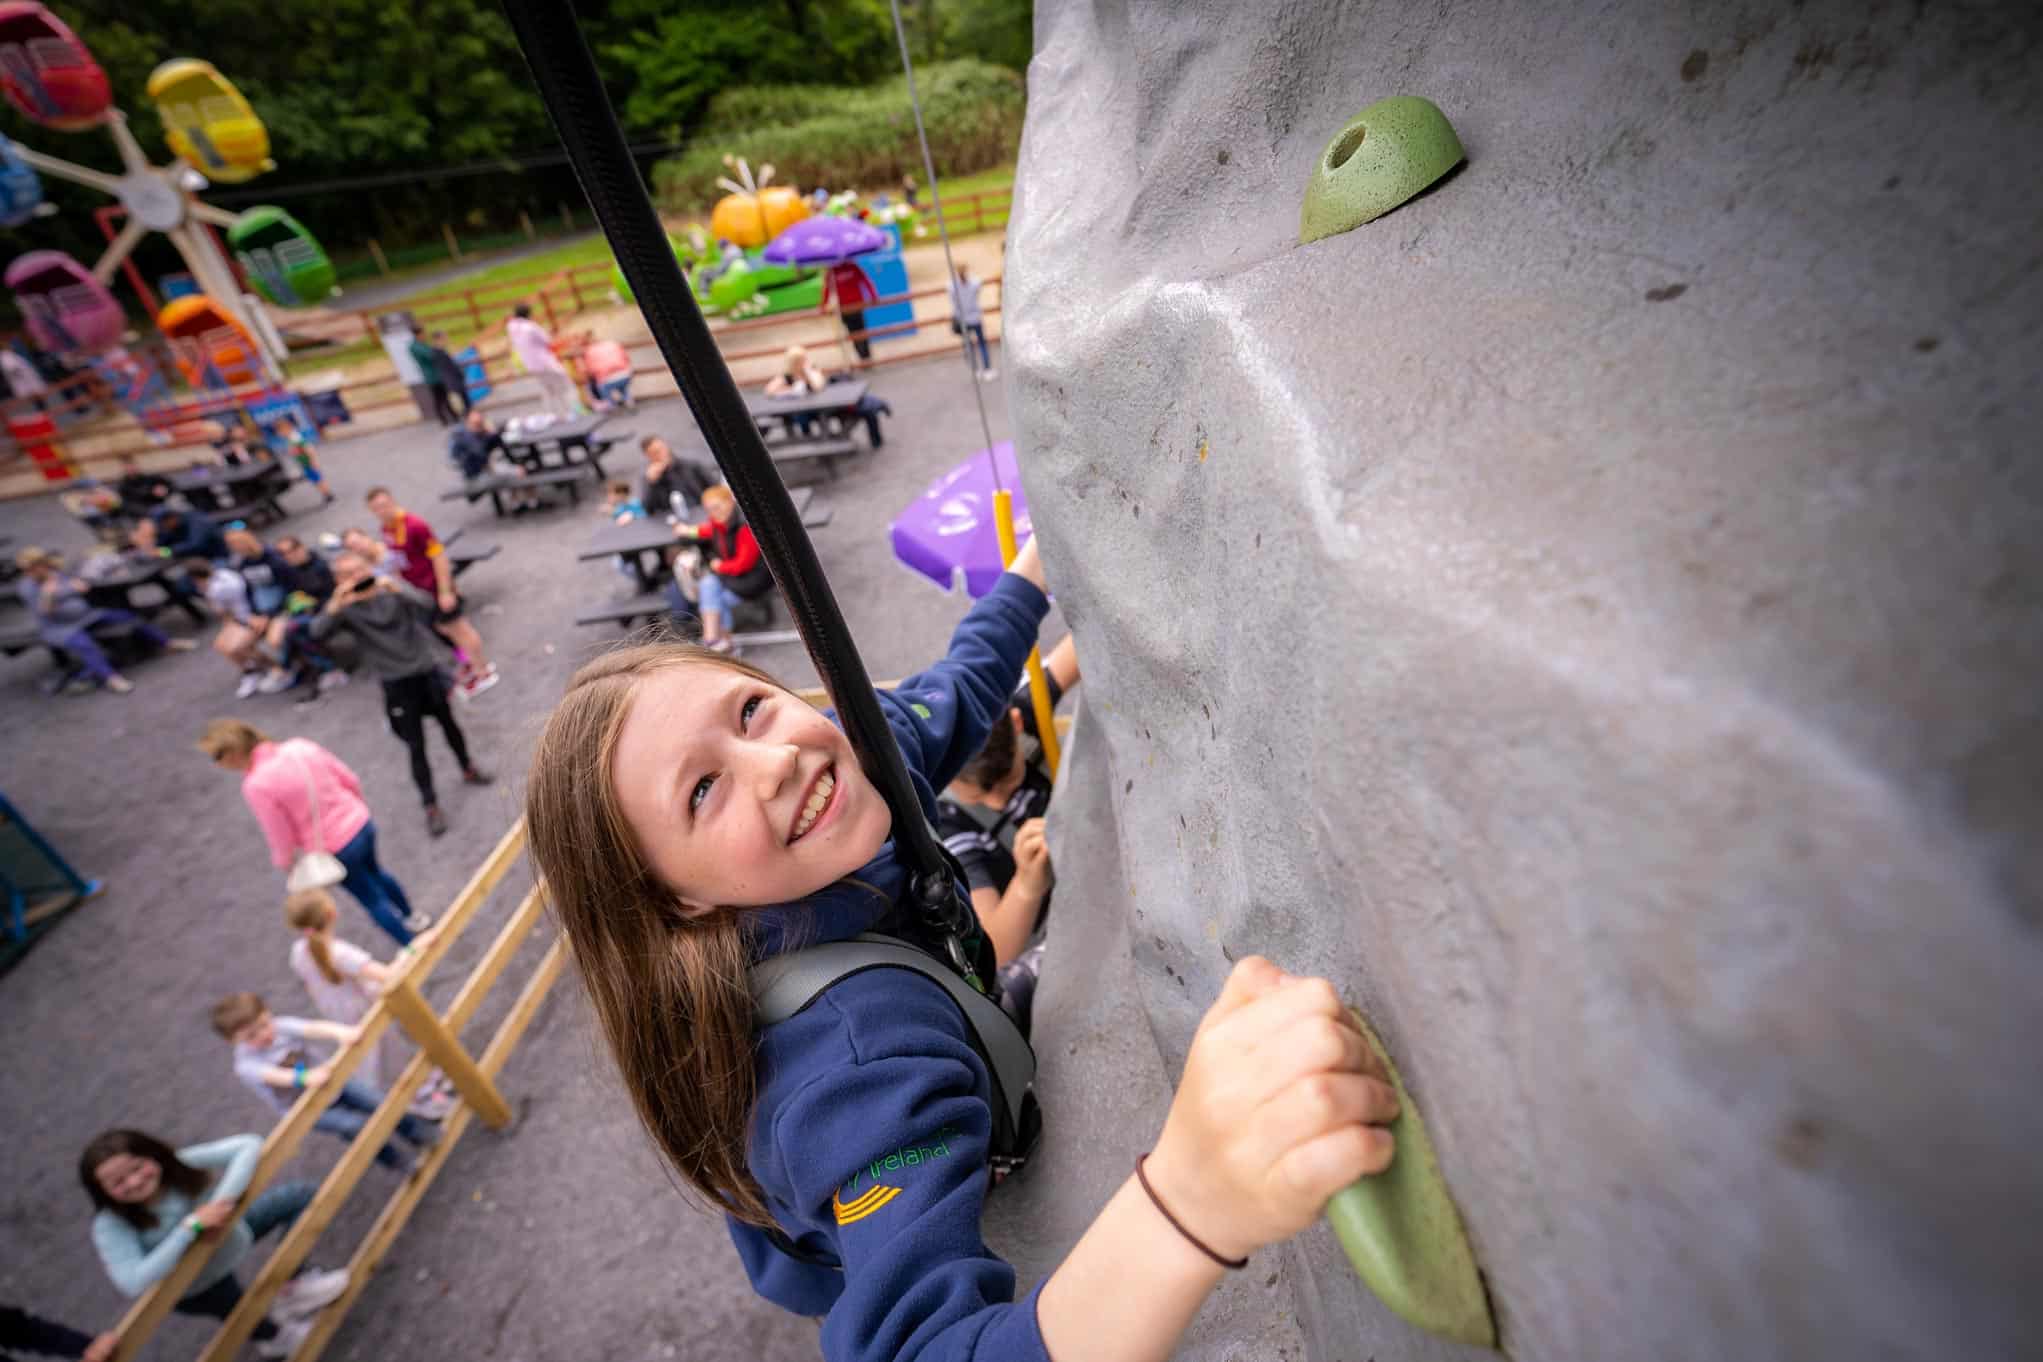 How far will you reach on the Climbing Wall at the Pirate Adventure Park? 